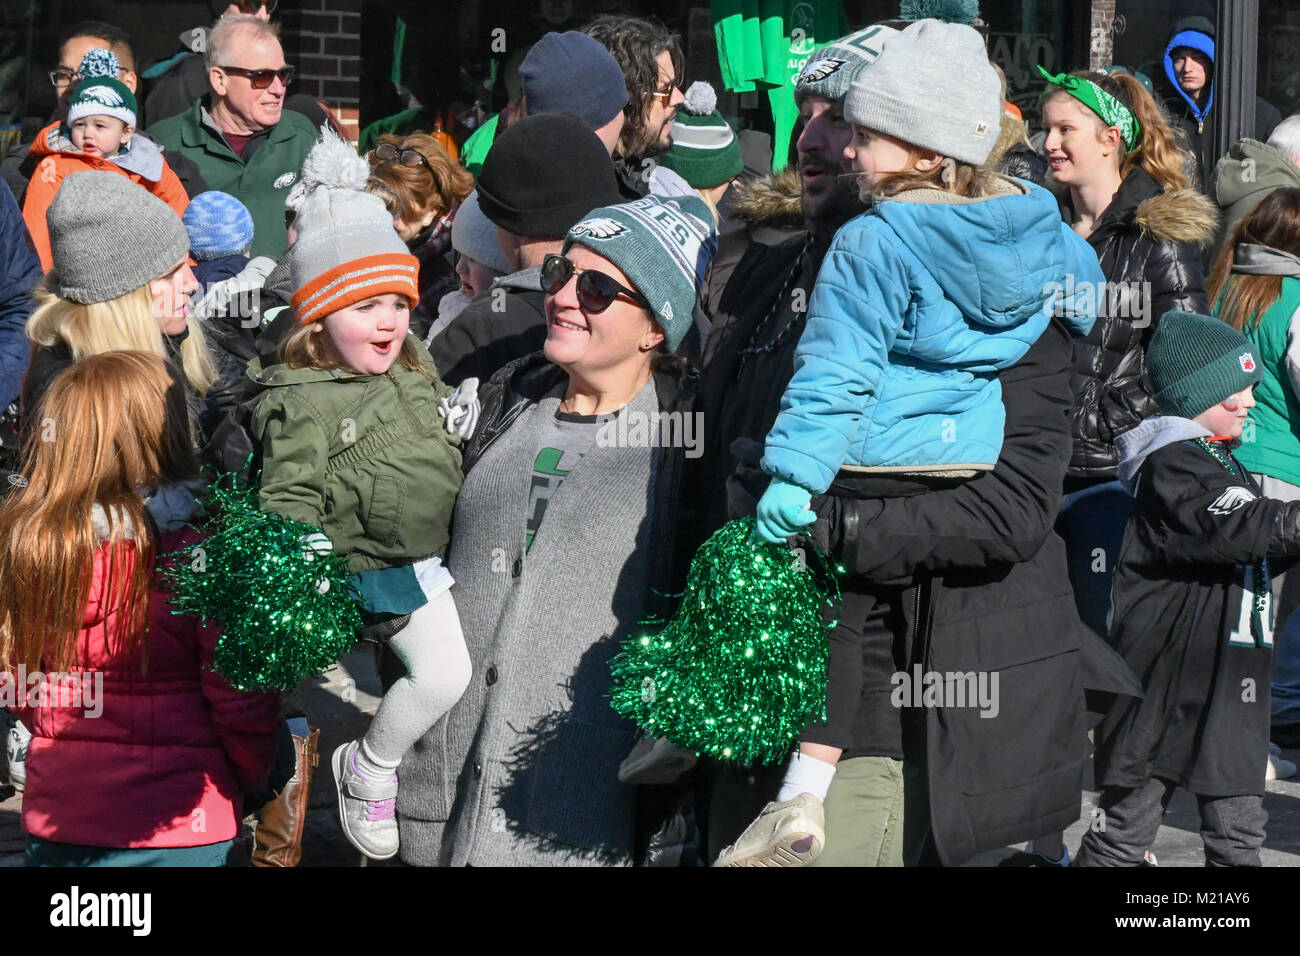 Media, PA, USA, Girl toddlers with sparkling green pom poms / pompoms / pom-poms and thousands of Philadelphia Eagles fans line the streets of Media for a rally supporting the NFC Championship Philadelphia Eagles in their pursuit of winning the NFL Super Bowl. Media, Delaware County, PA is located approximately 14 miles South of Philadelphia, PA. Temperatures in the mid 20 degree range (fahrenheit) Credit: Don Mennig/Alamy Live News Stock Photo